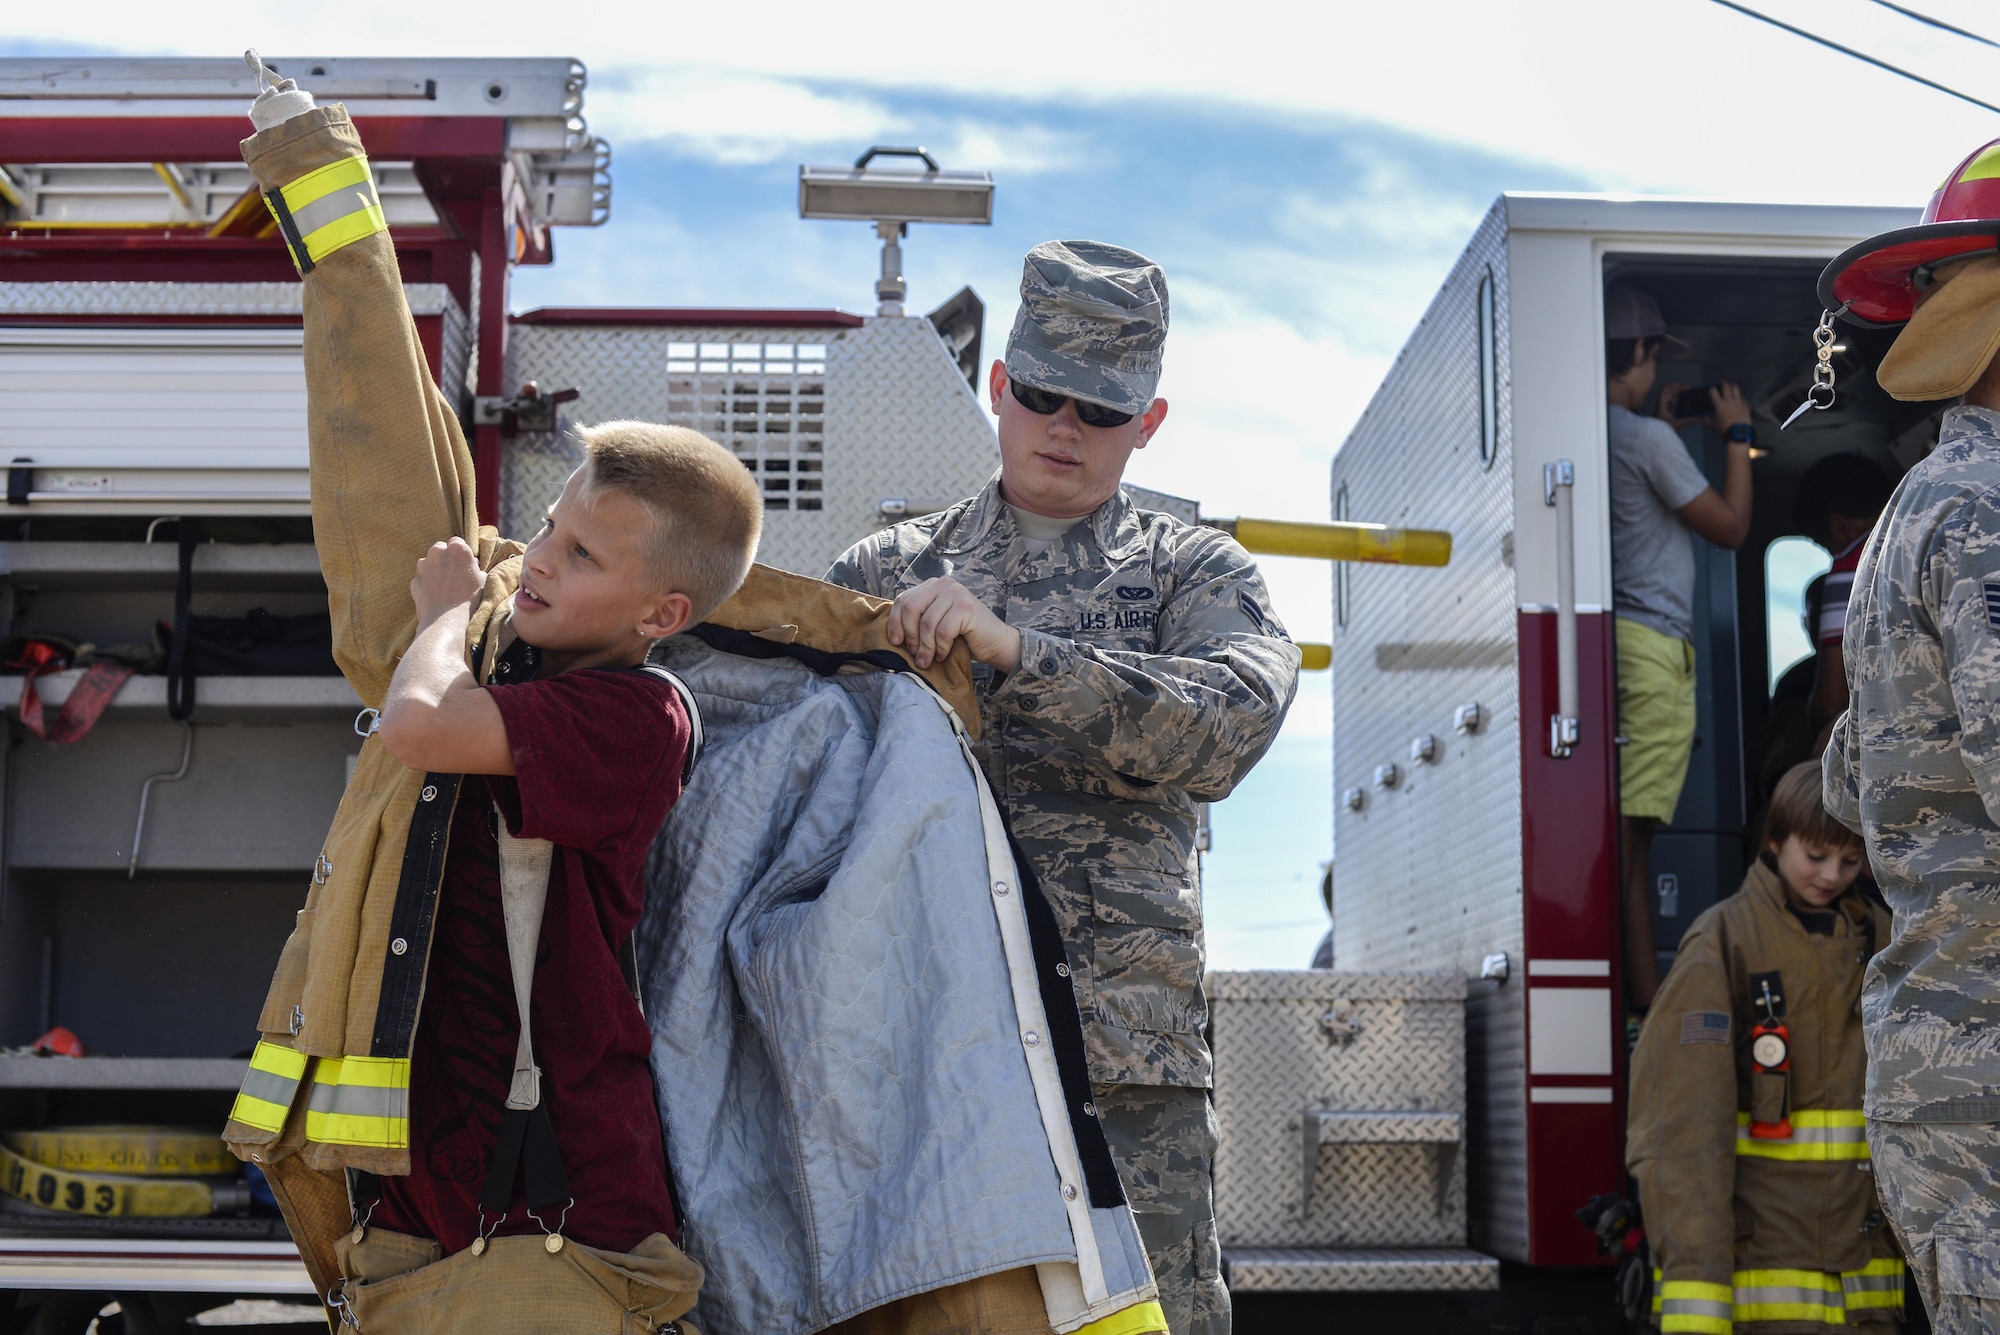 A firefighter with the 49th Civil Engineer Squadron Fire Protection Flight helps a student at Holloman Air Force Base’s middle school put on a flame retardant suit as part of the base’s annual Fire Prevention Week, Oct. 13, 2016 at Holloman AFB, N.M. Holloman firefighters taught students about fire safety and prevention, and showcased firefighting equipment to them. (U.S. Air Force photo by Airman 1st Class Alexis P. Docherty)